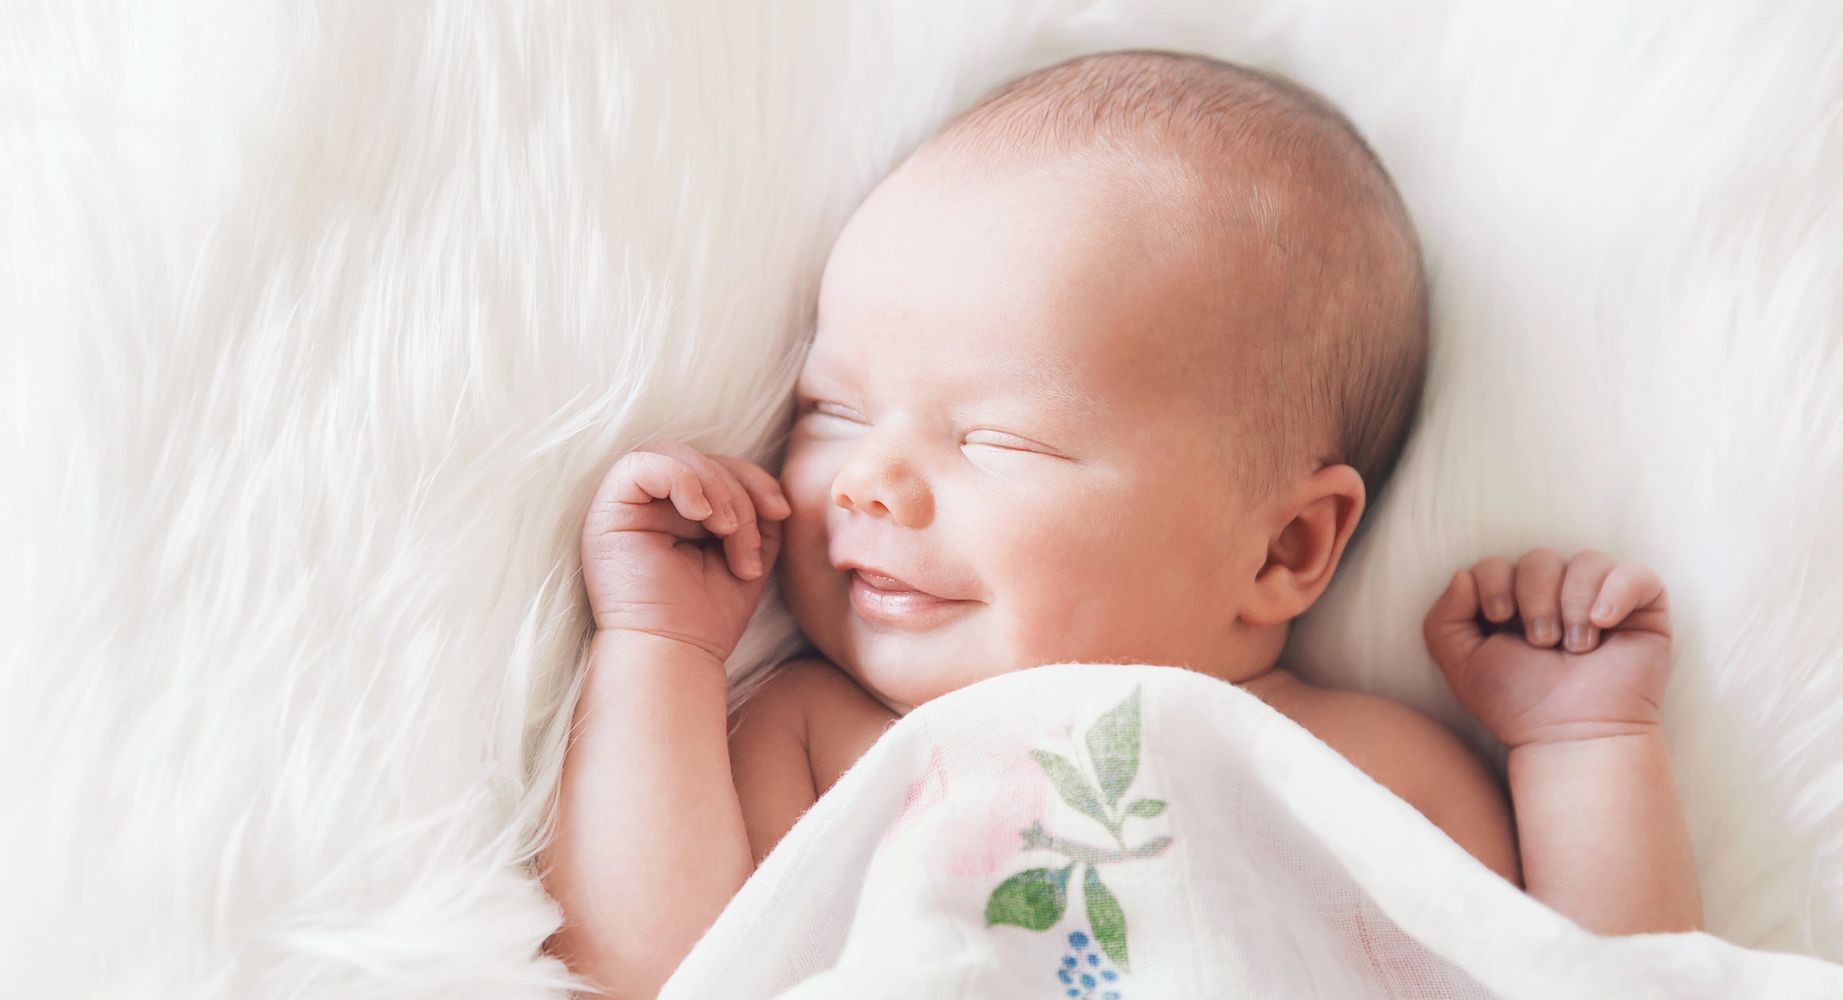 Photo of an infant smiling in their sleep